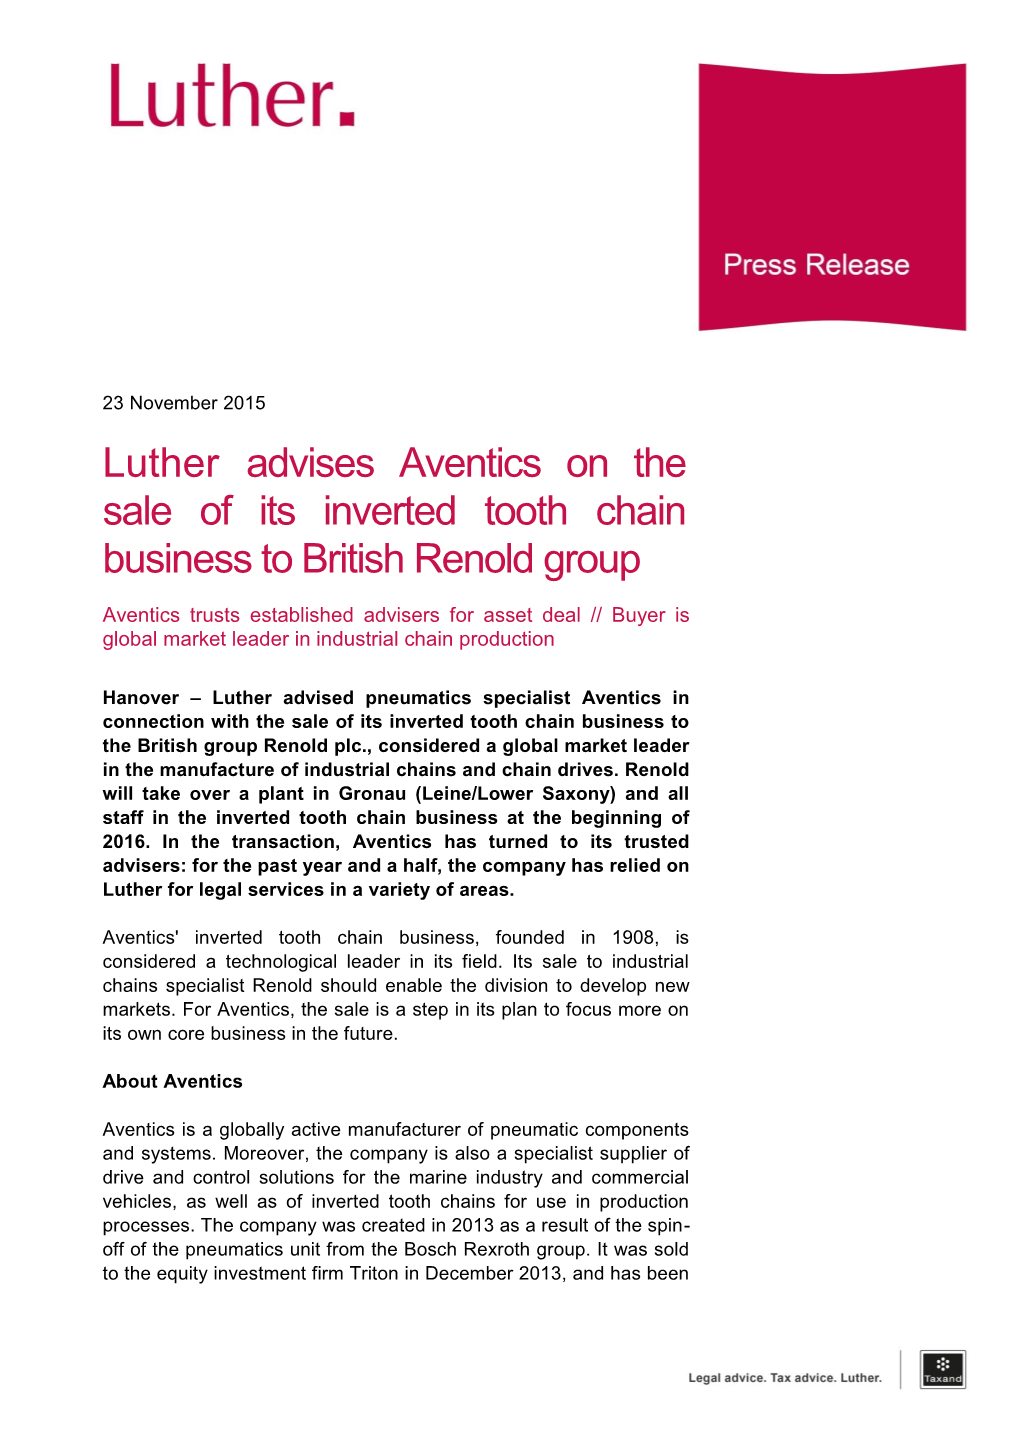 Luther Advises Aventics on the Sale of Its Inverted Tooth Chain Business to British Renold Group